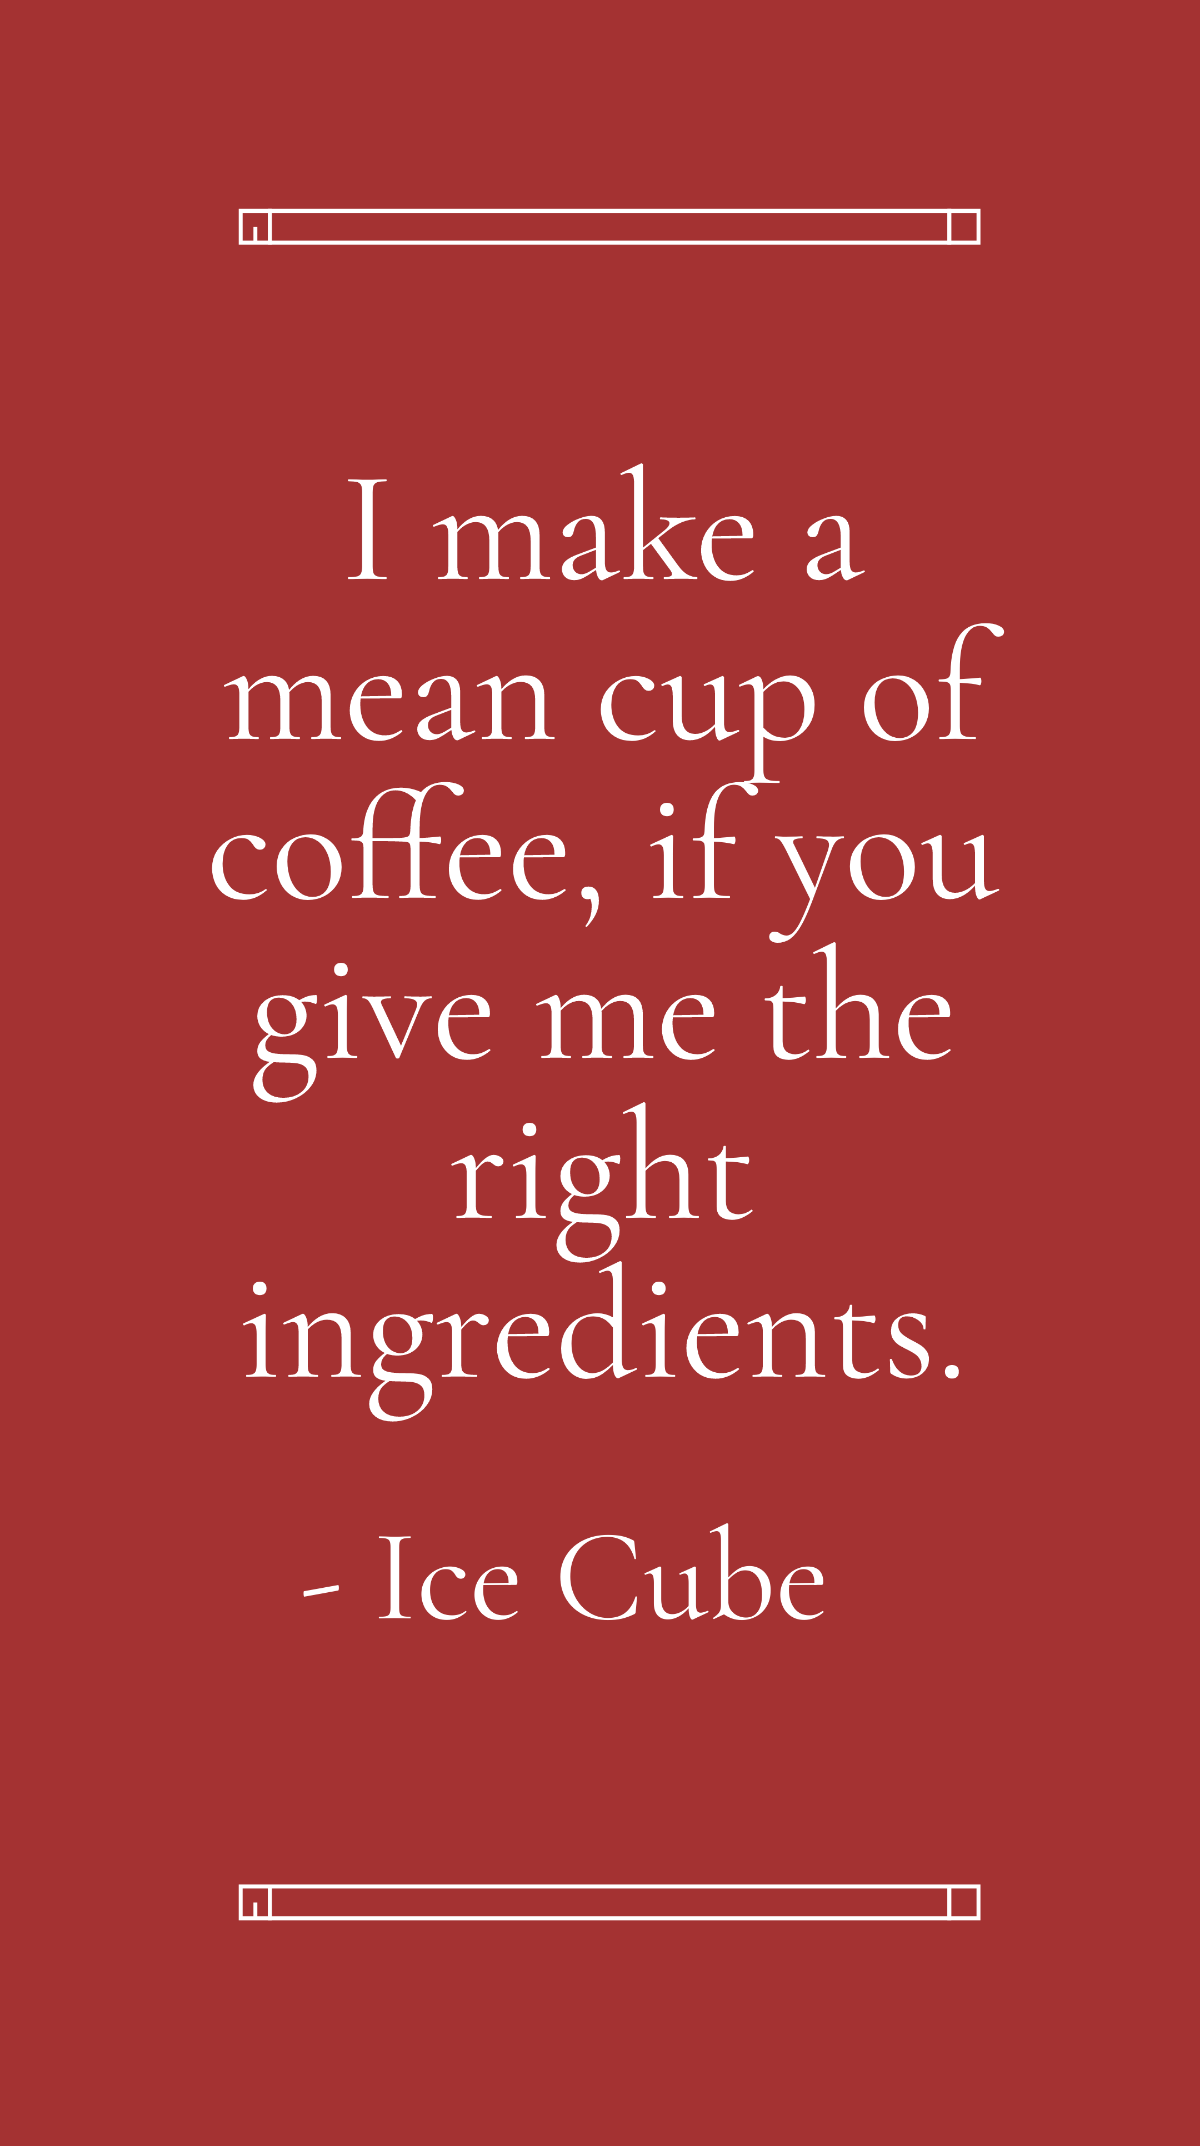 Ice Cube - I make a mean cup of coffee, if you give me the right ingredients.